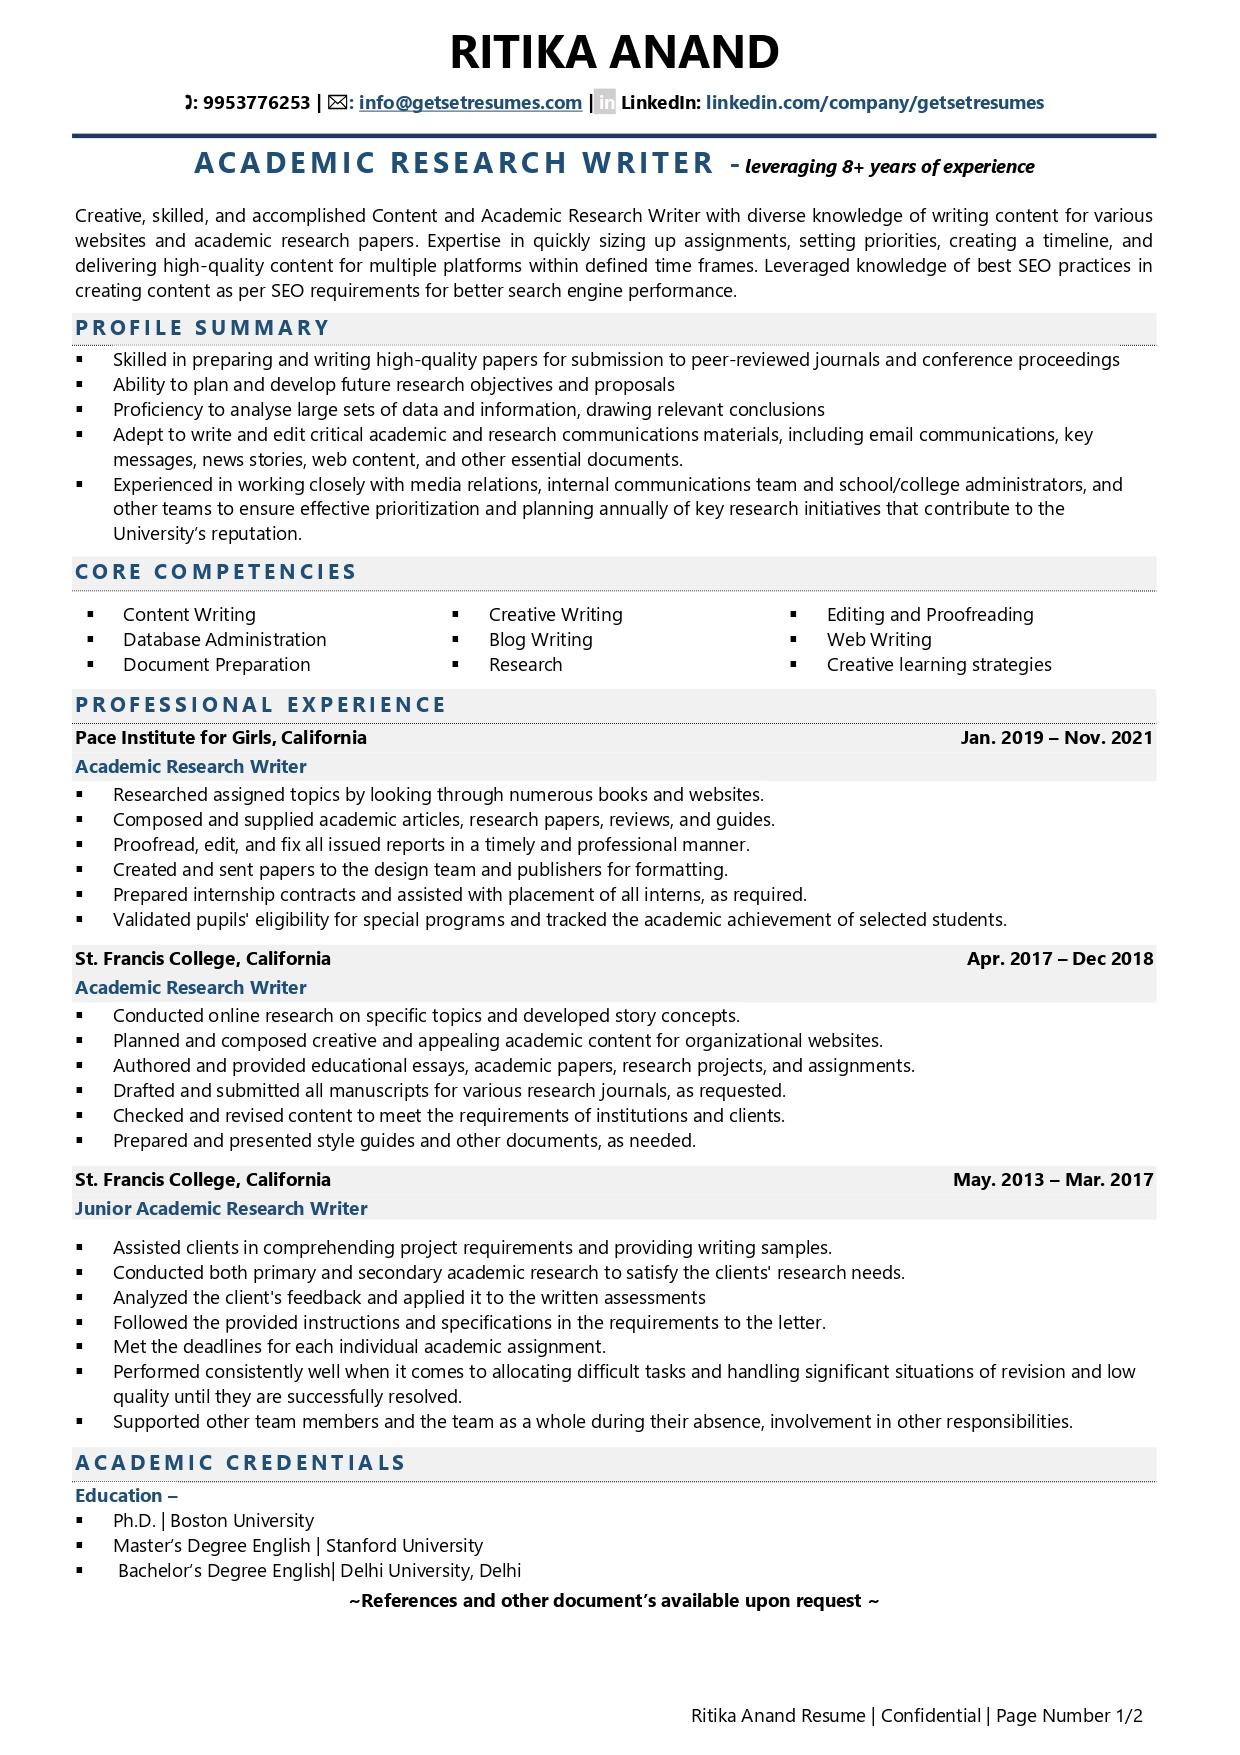 Academic Research Writer - Resume Example & Template